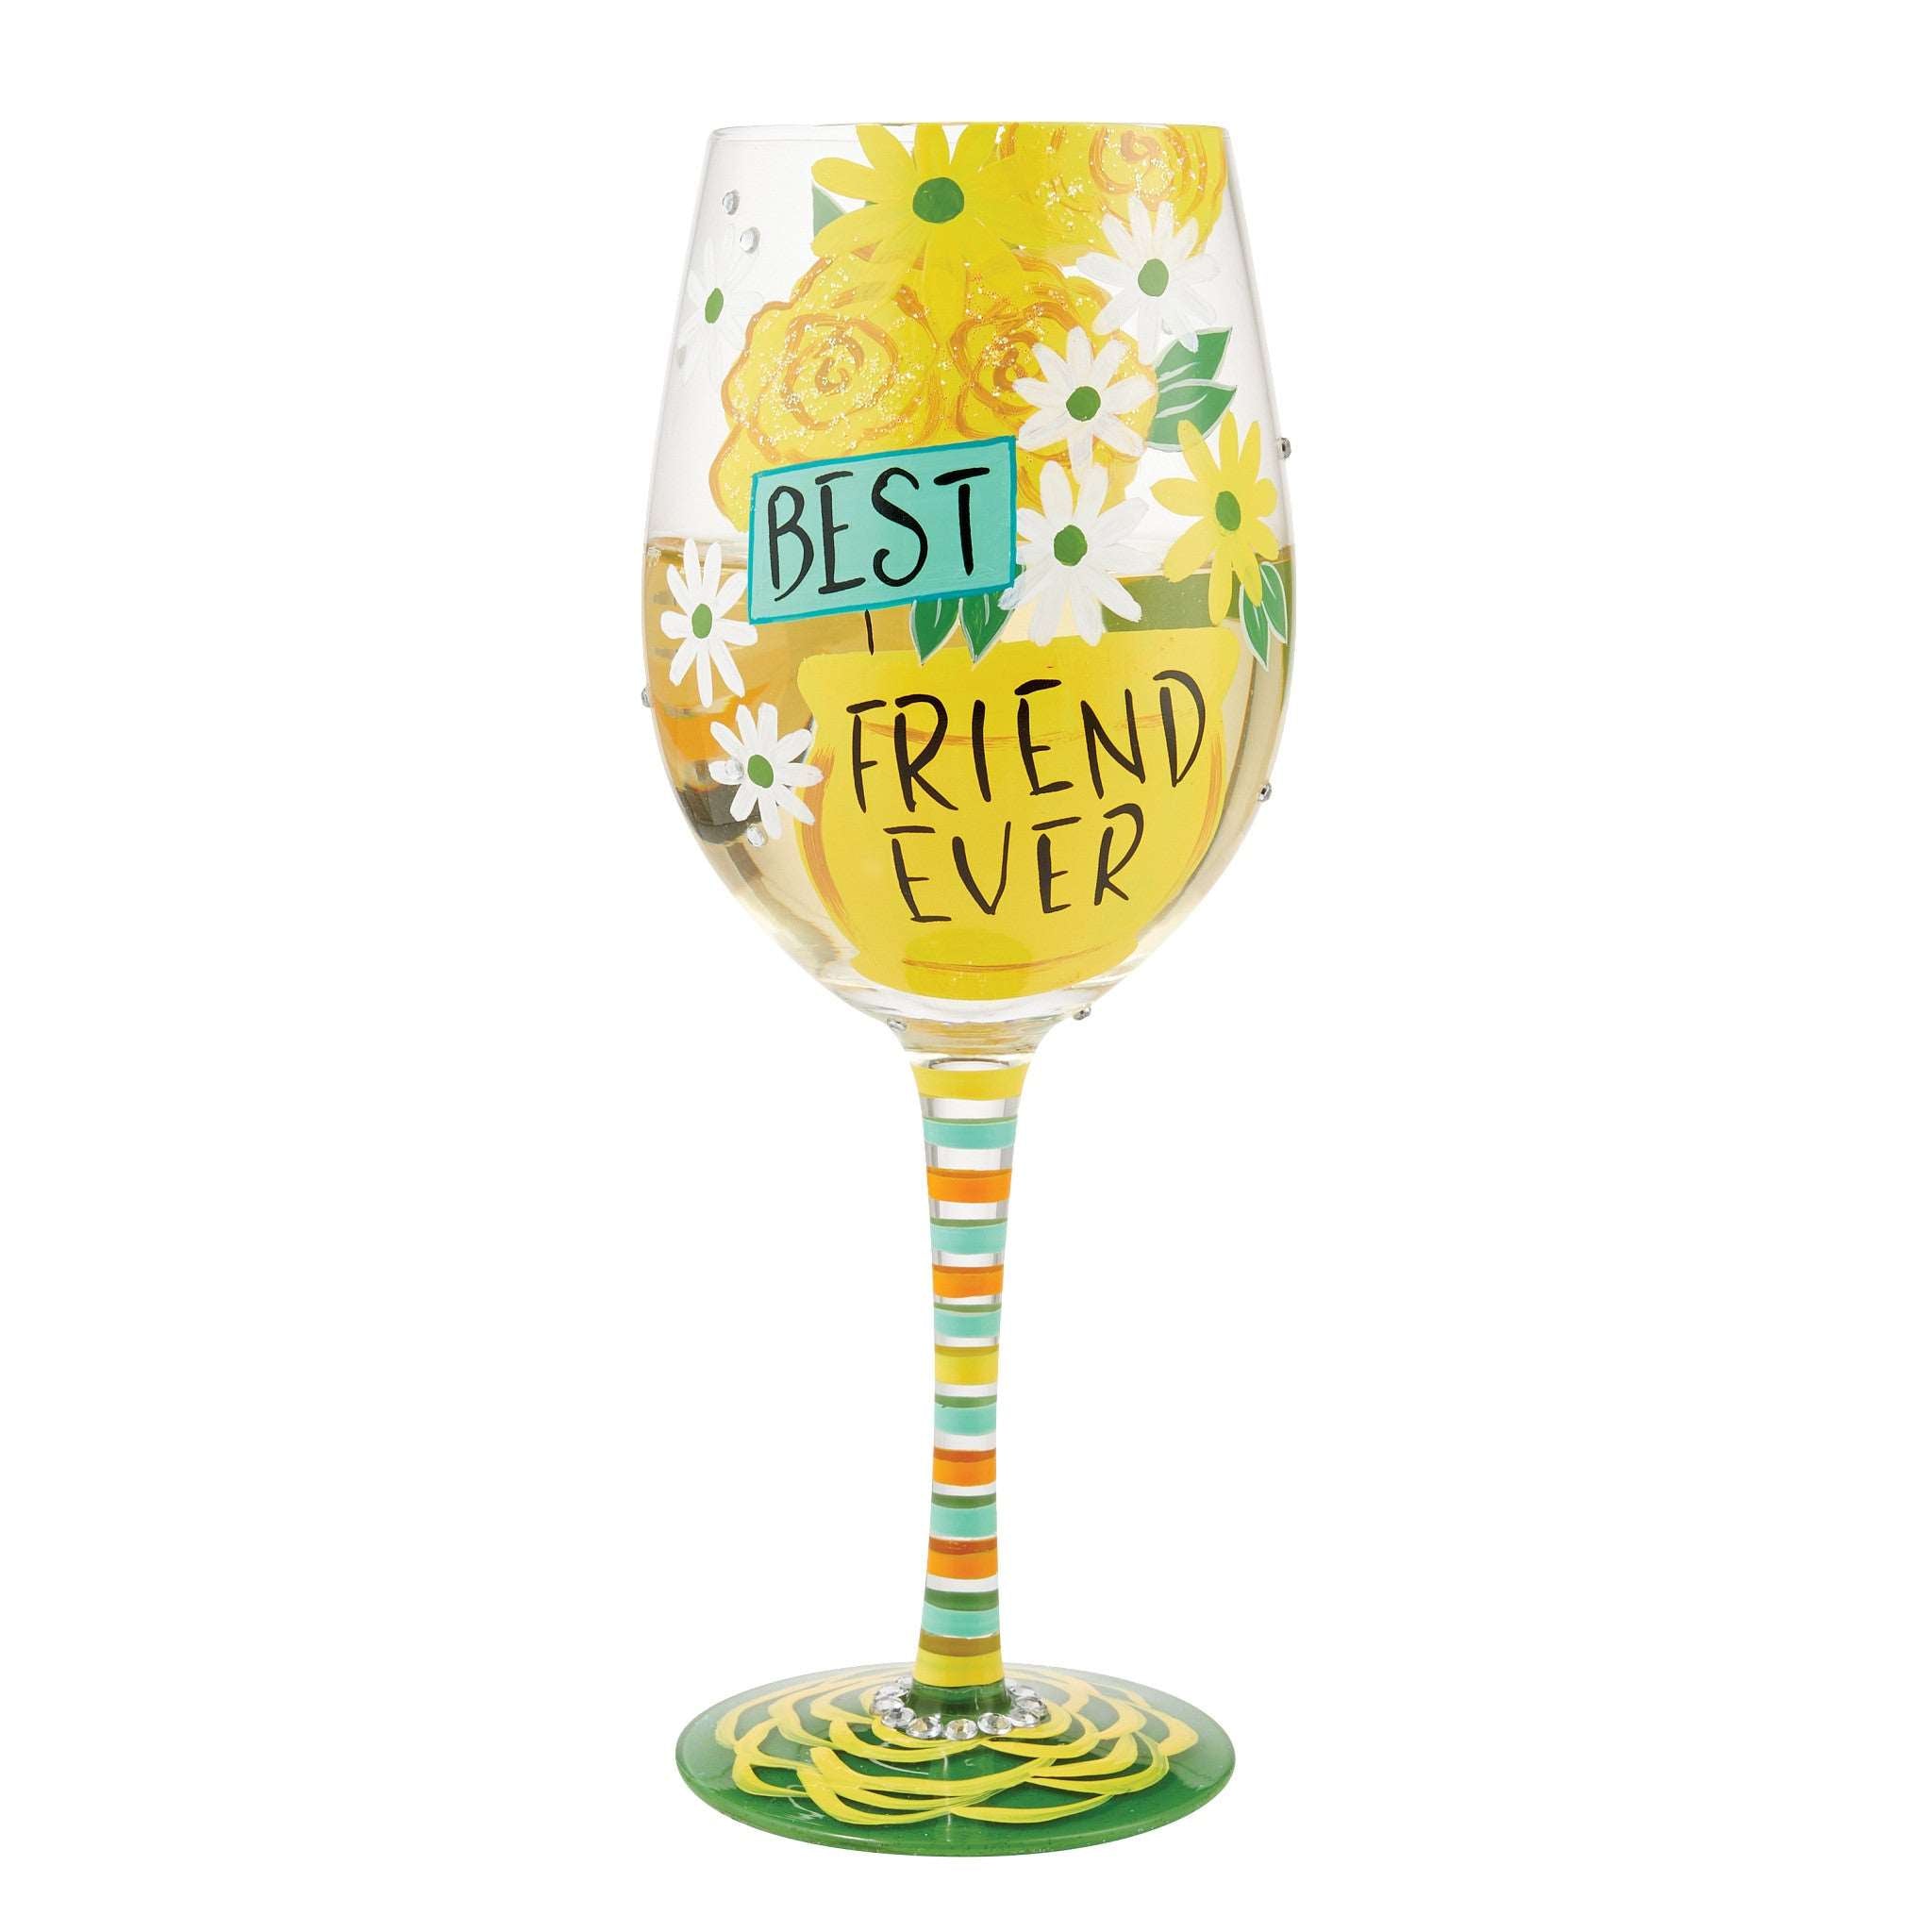 Best Friend Ever Hand Painted Wine Glass